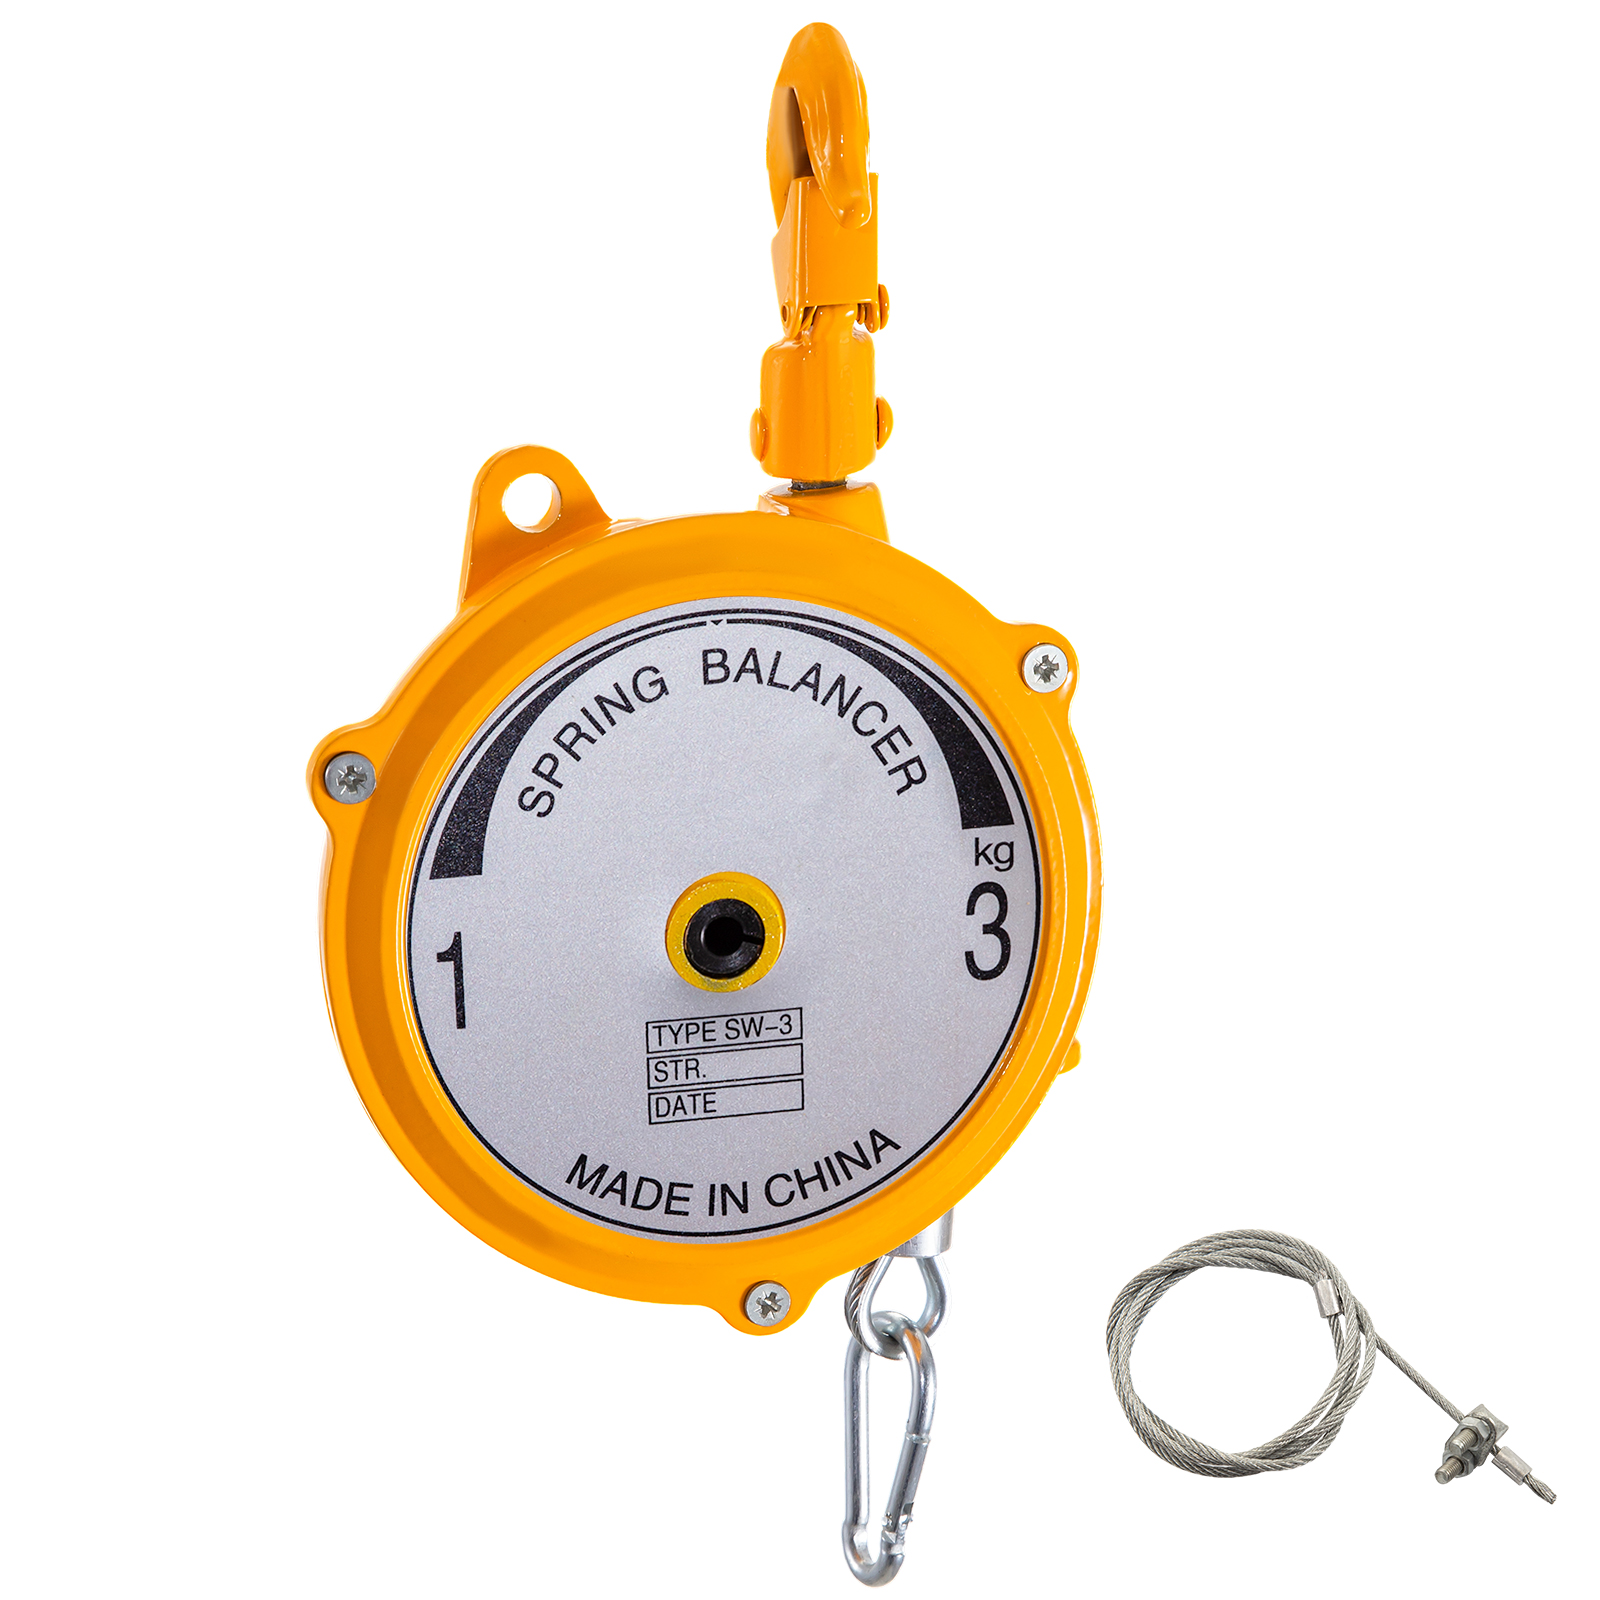 Spring Balancer Retractable Tool Holder 2-7lbs(1-3kg) Hanging Equipment Yellow от Vevor Many GEOs